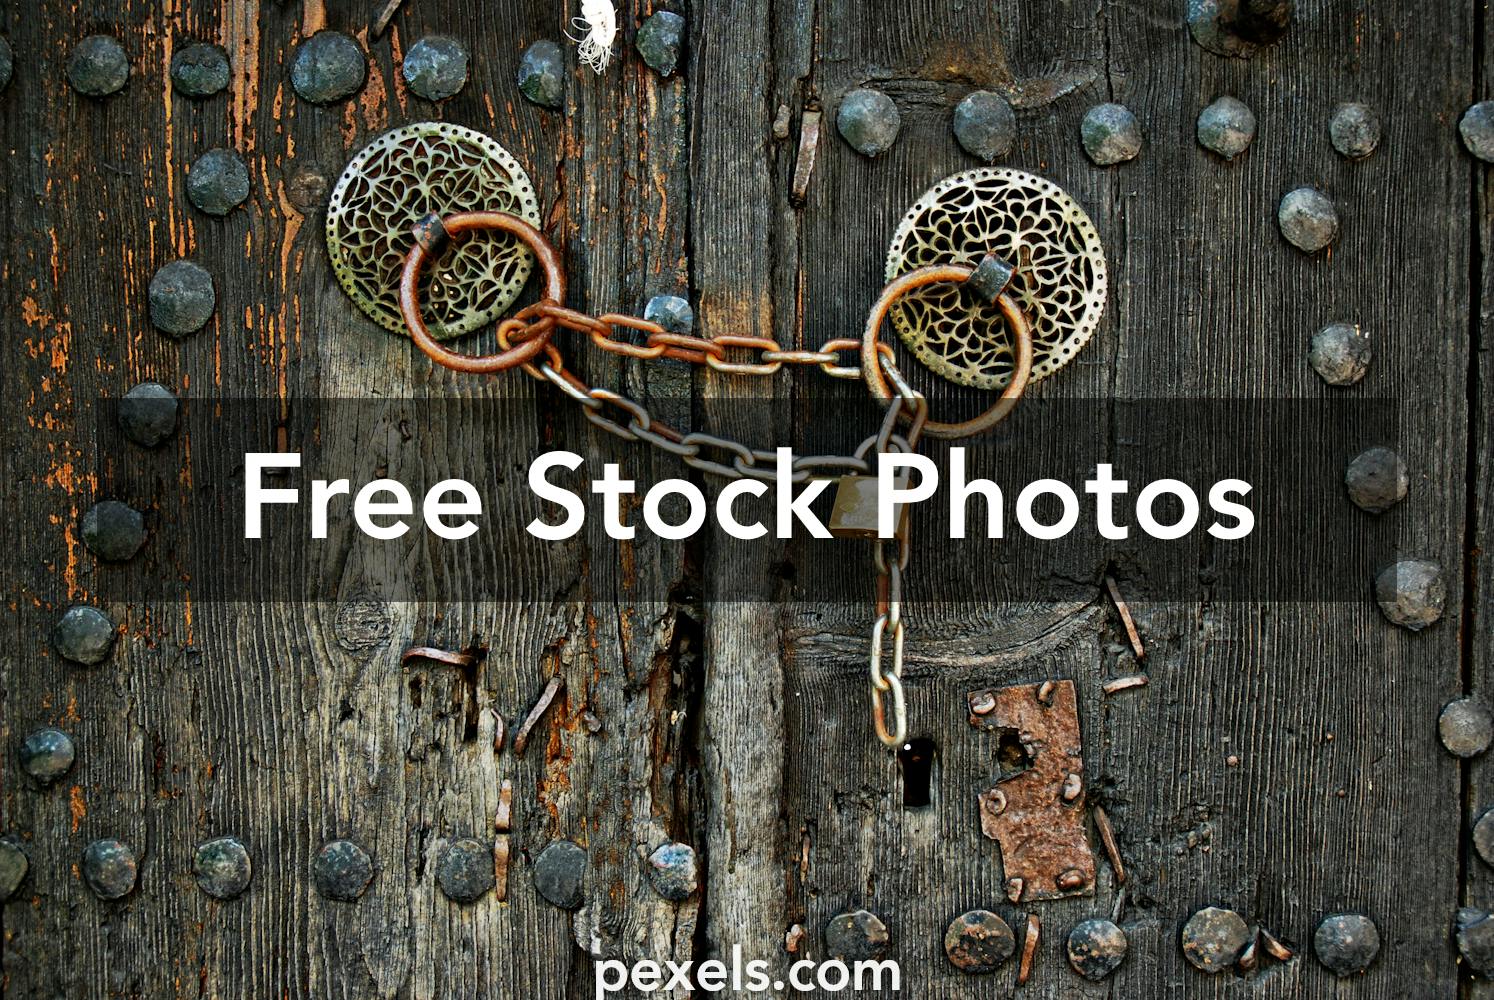 47,750+ Best Free Old doors Stock Photos & Images · 100% Royalty-Free ...